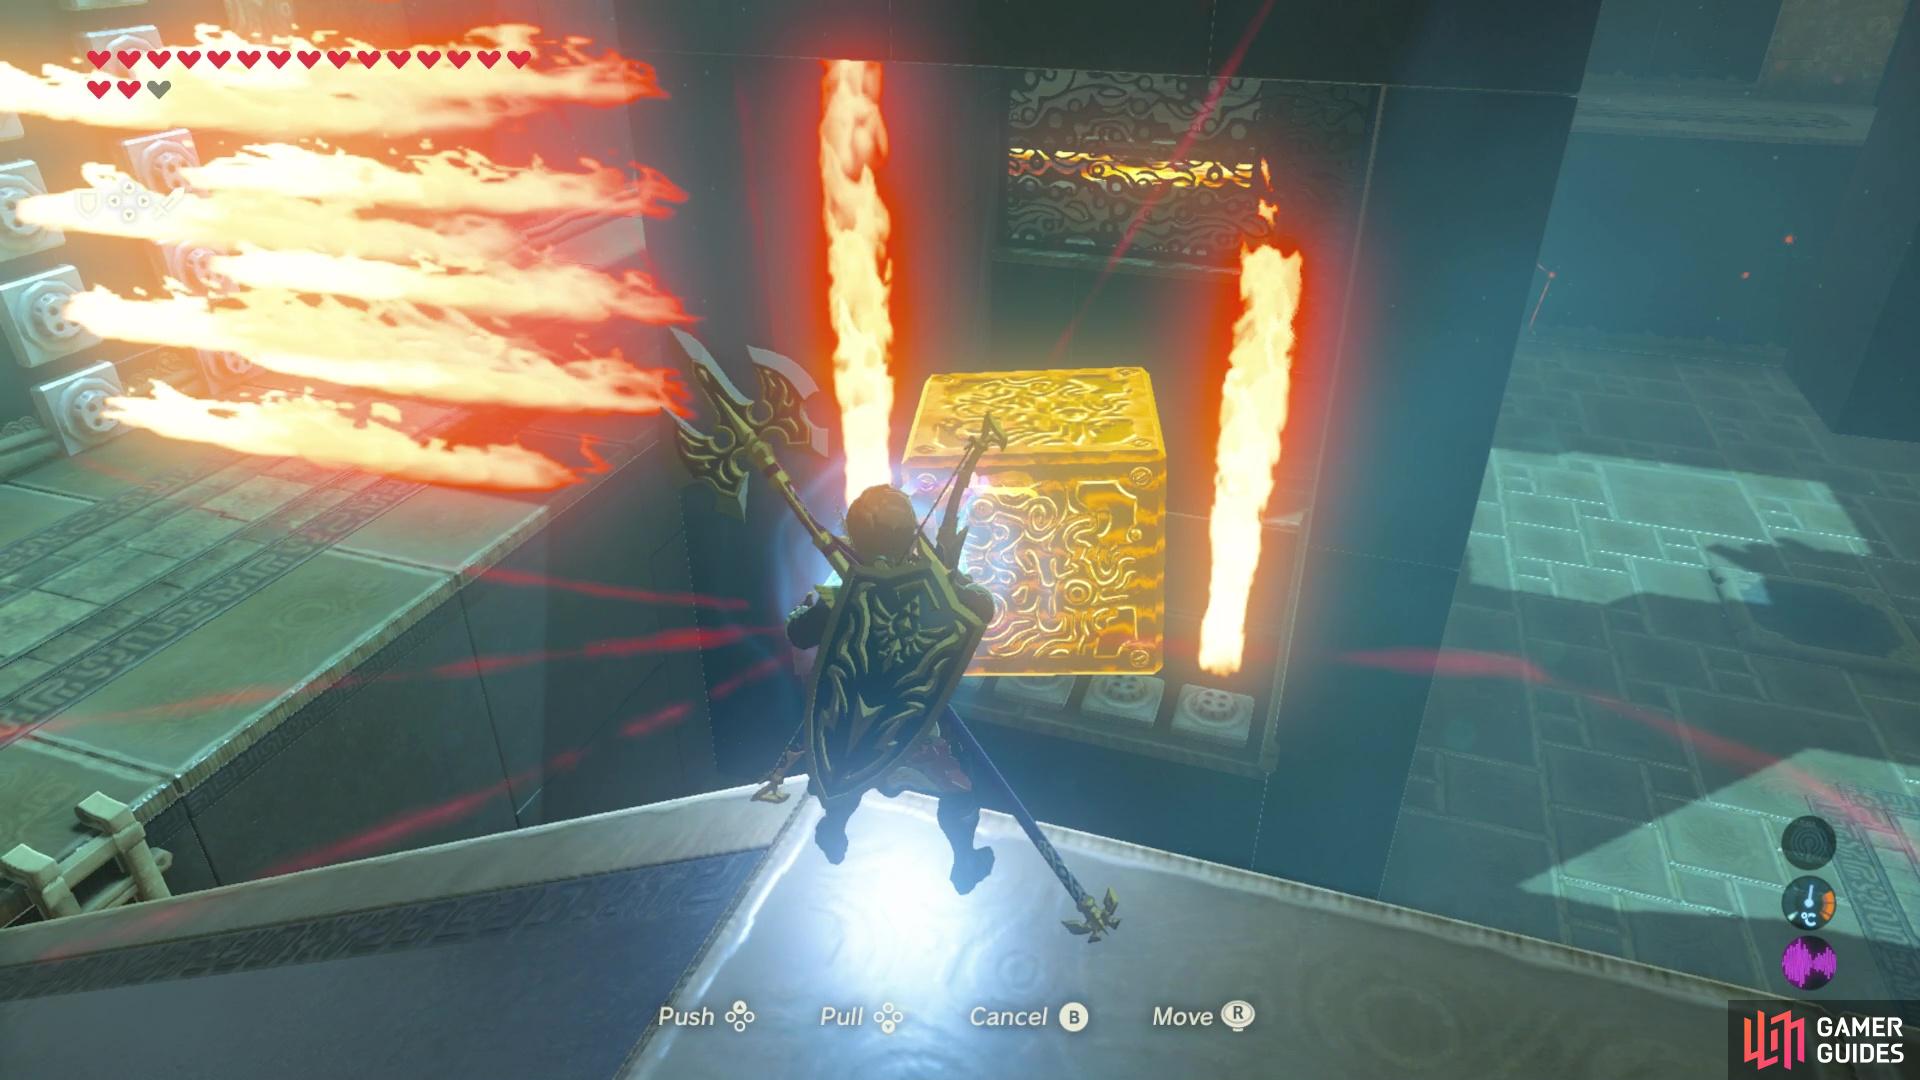 Use the metal cube to make a gap in the fire jets so you can grab the treasure!